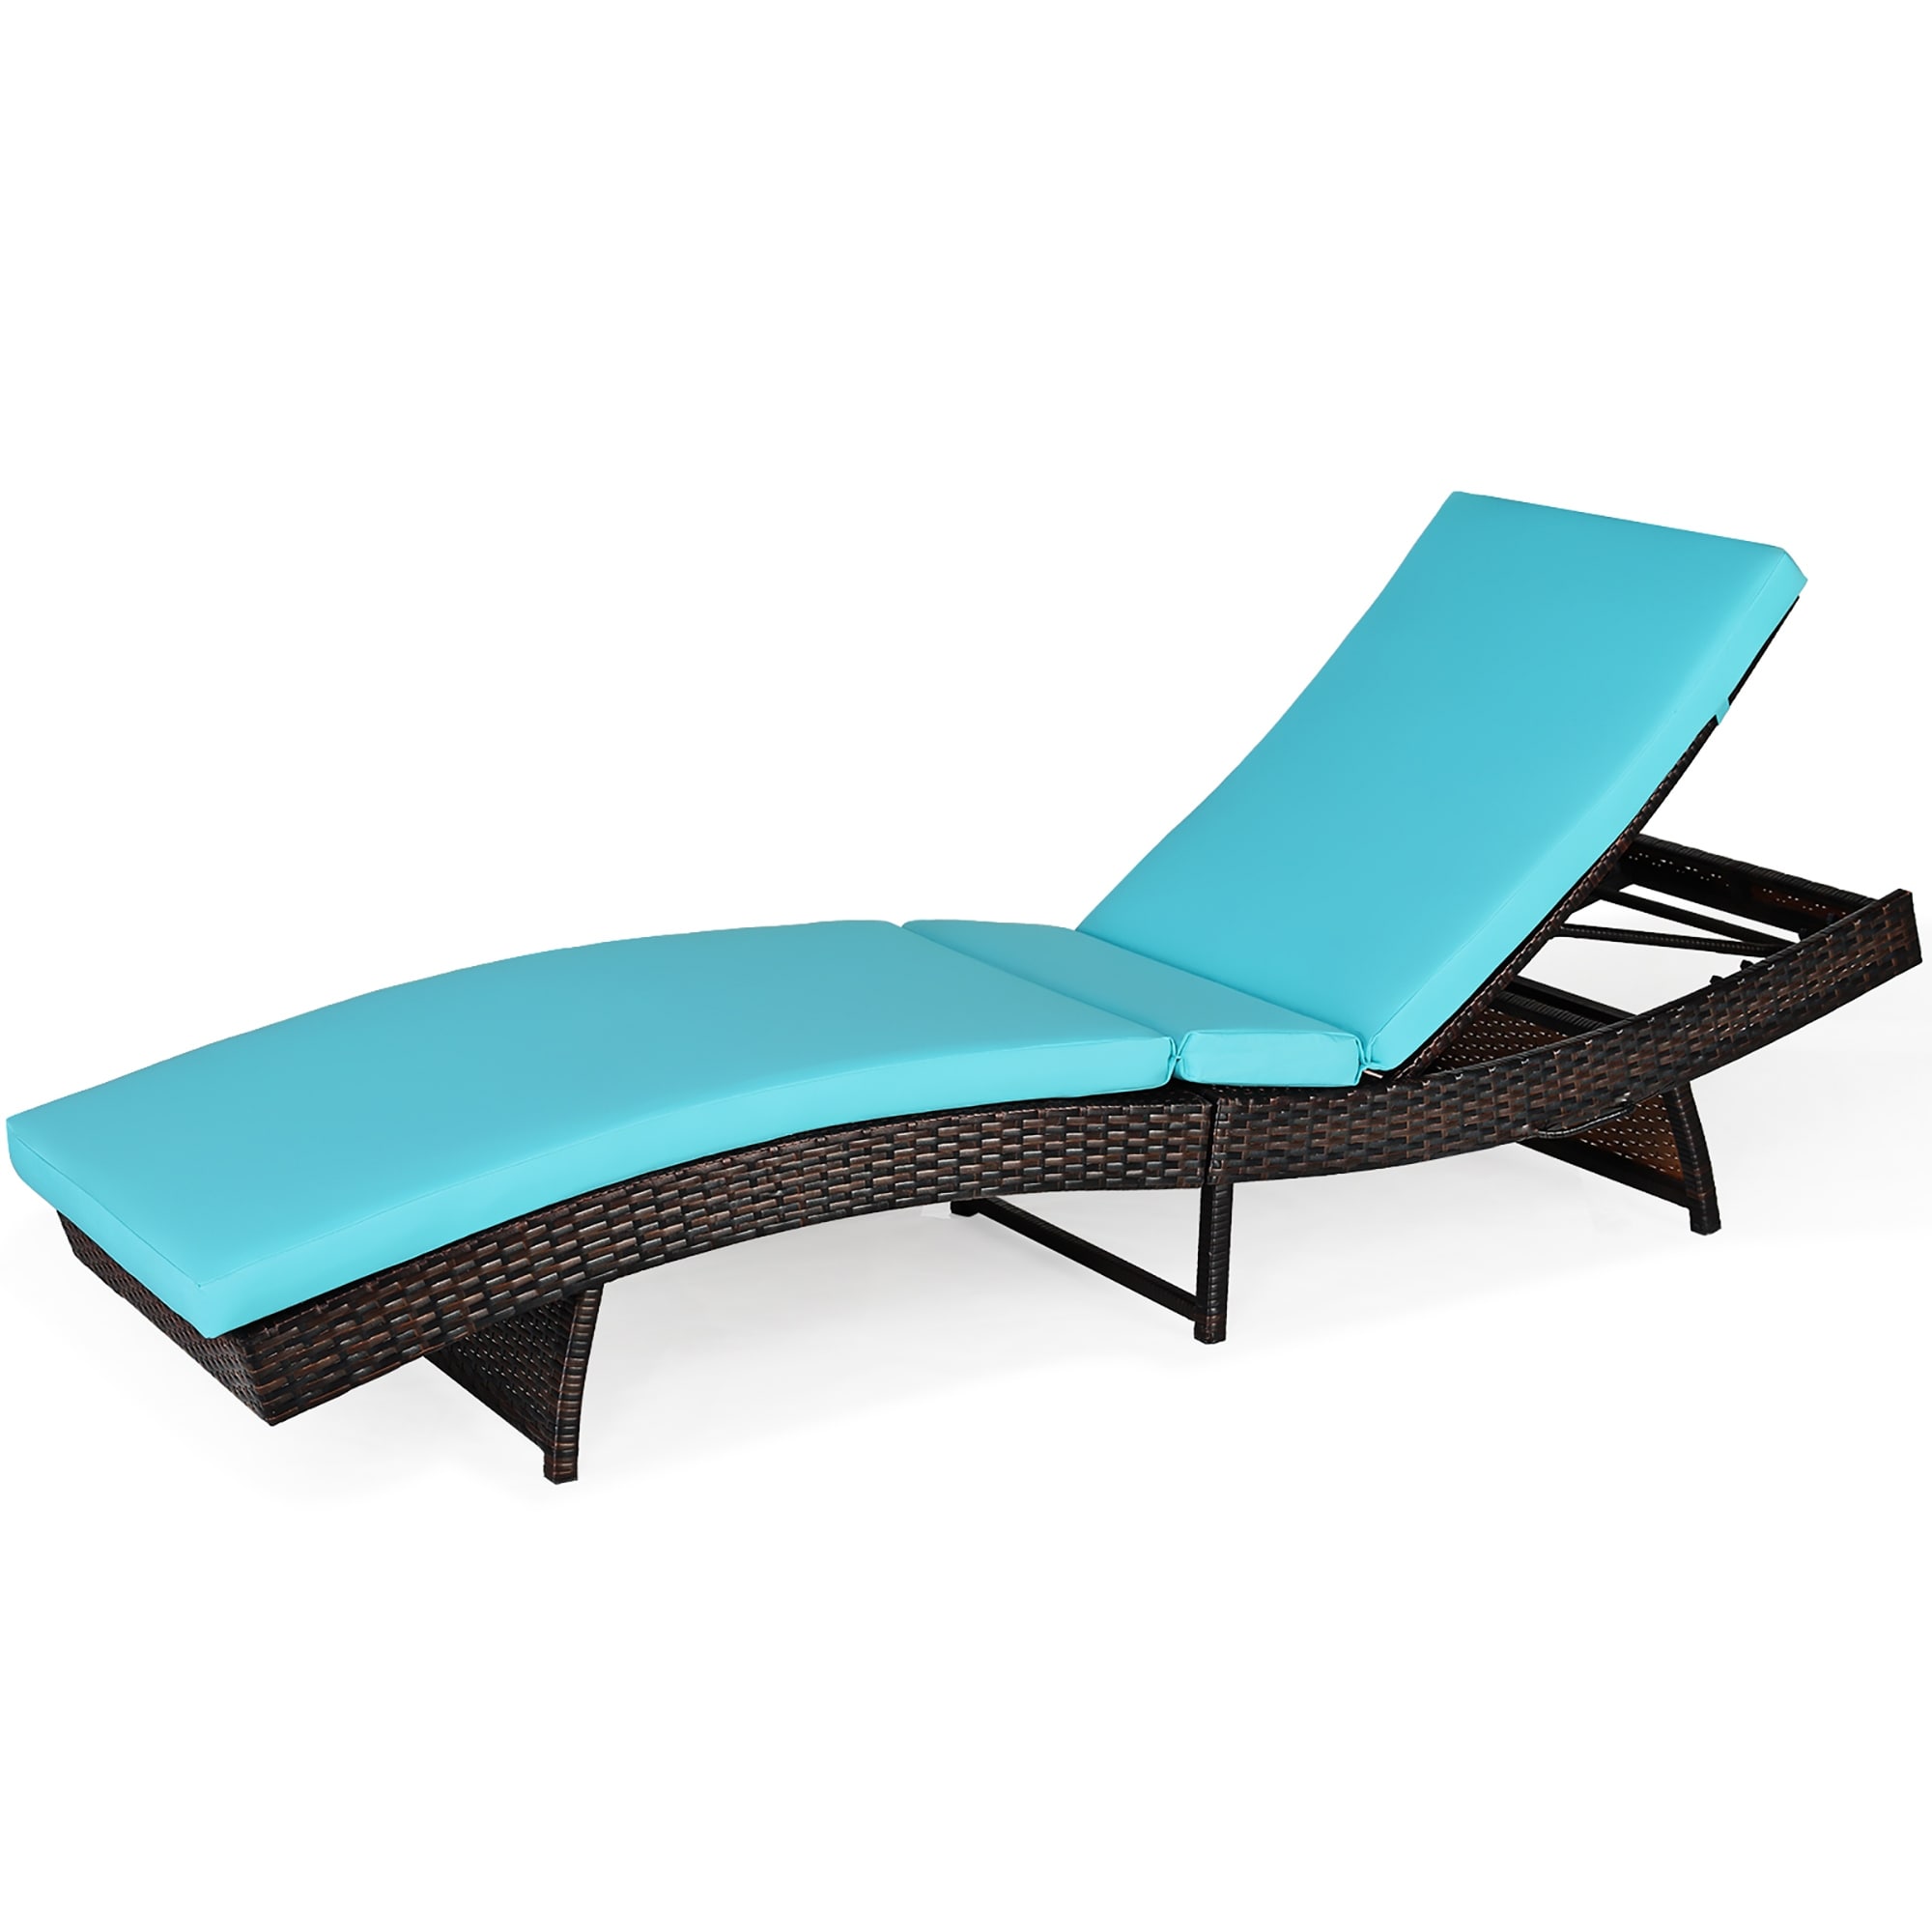 Outdoor Folding Chaise Lounge Rattan Leisure Reclining Lounge Chair